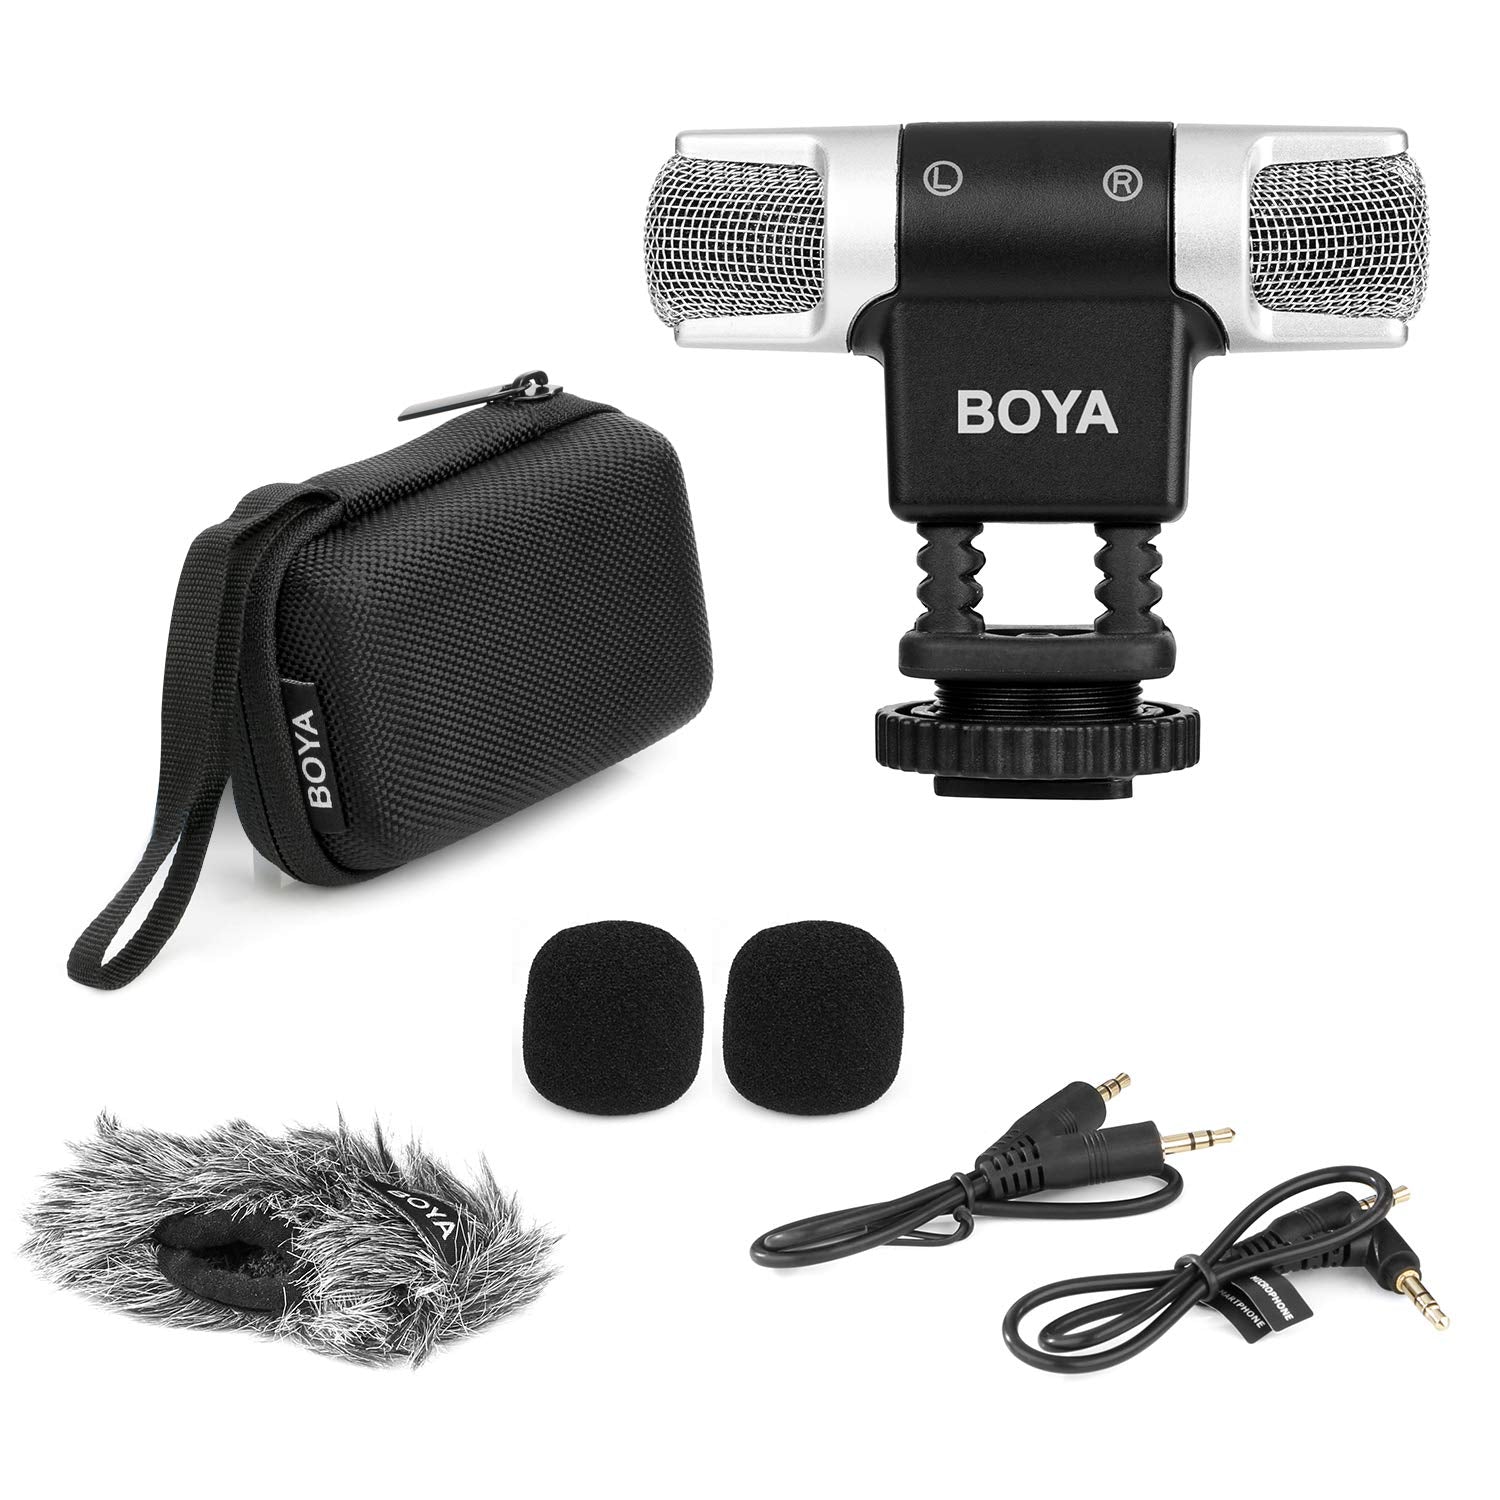 BOYA MM3 Compact Condenser Stereo Video Microphone Including Shock Mount, Foam & Deadcat Windscreens, Case Compatible with iPhone/Andoid Smartphones, Canon Nikon DSLR Cameras and Camcorders  - Like New